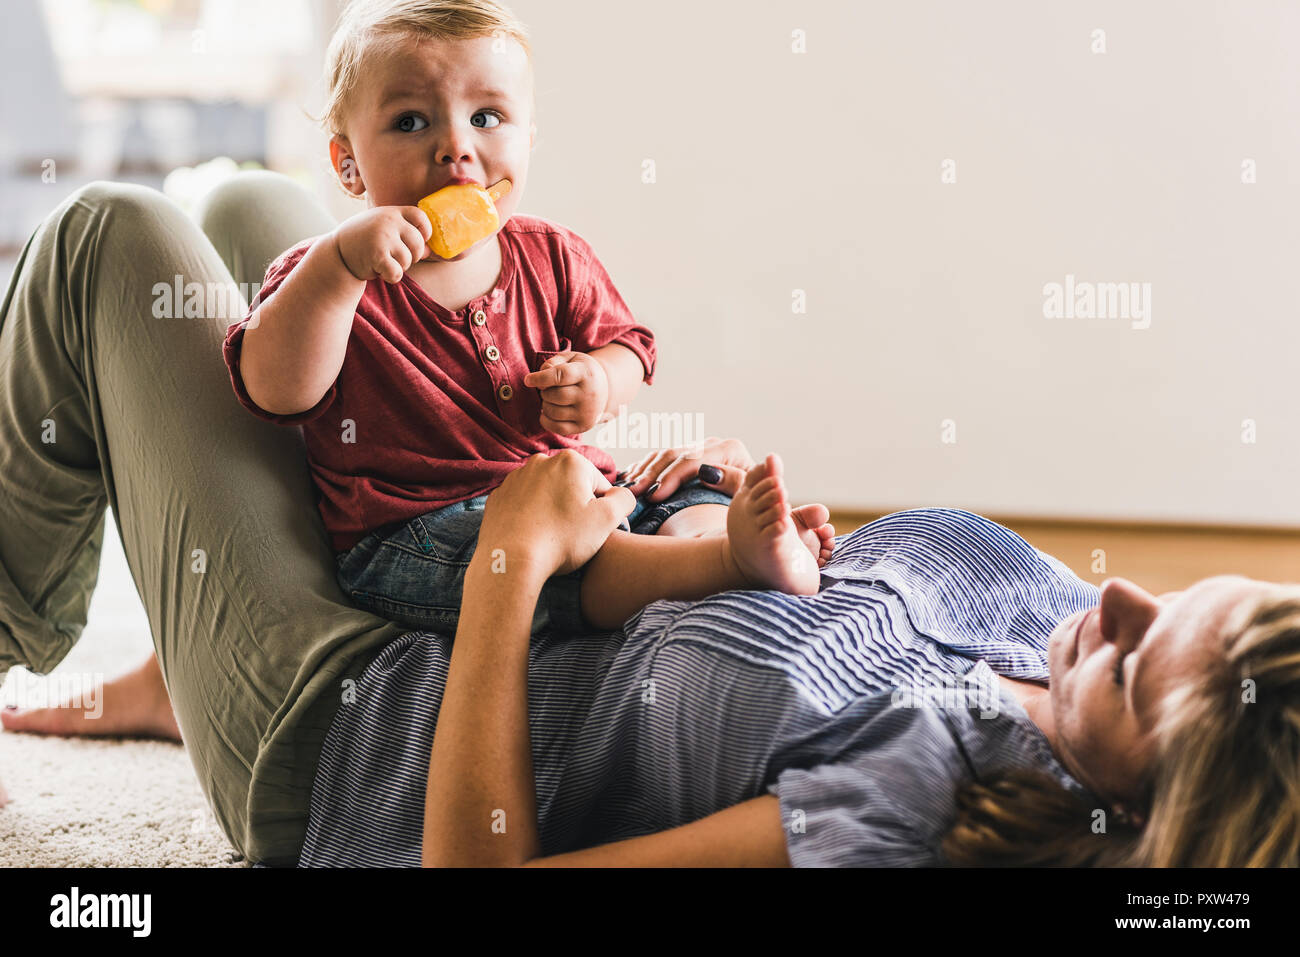 Mother and son at home eating ice lolly Stock Photo